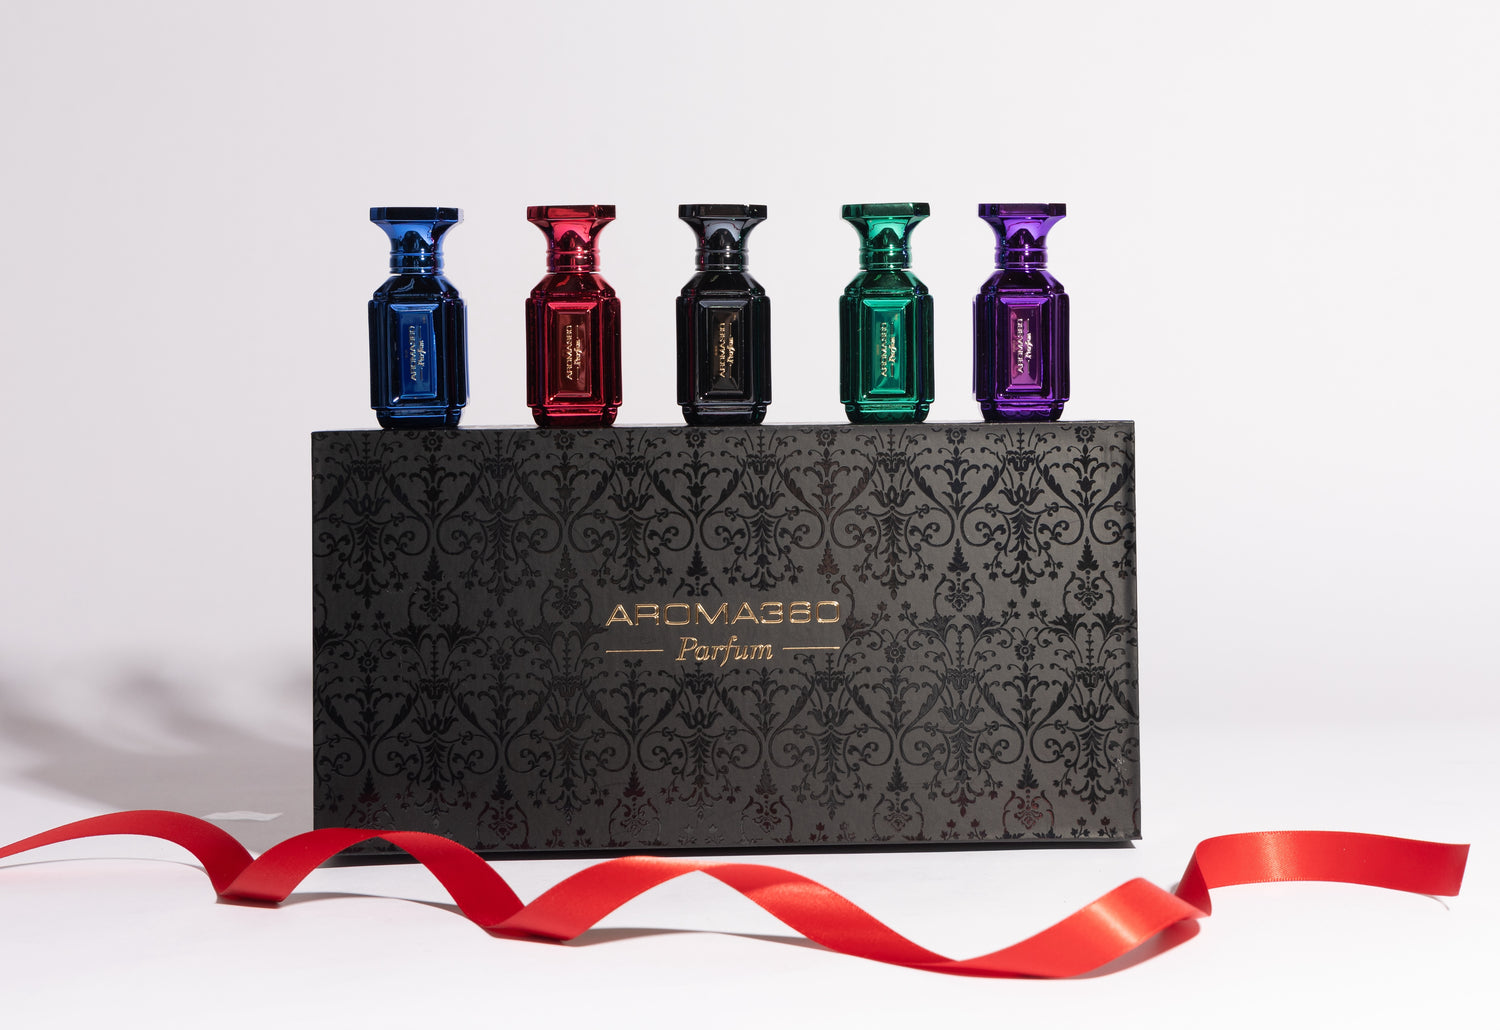 Elevate Your Gifting: A symphony of Fragrance with the Parfum Discovery Set